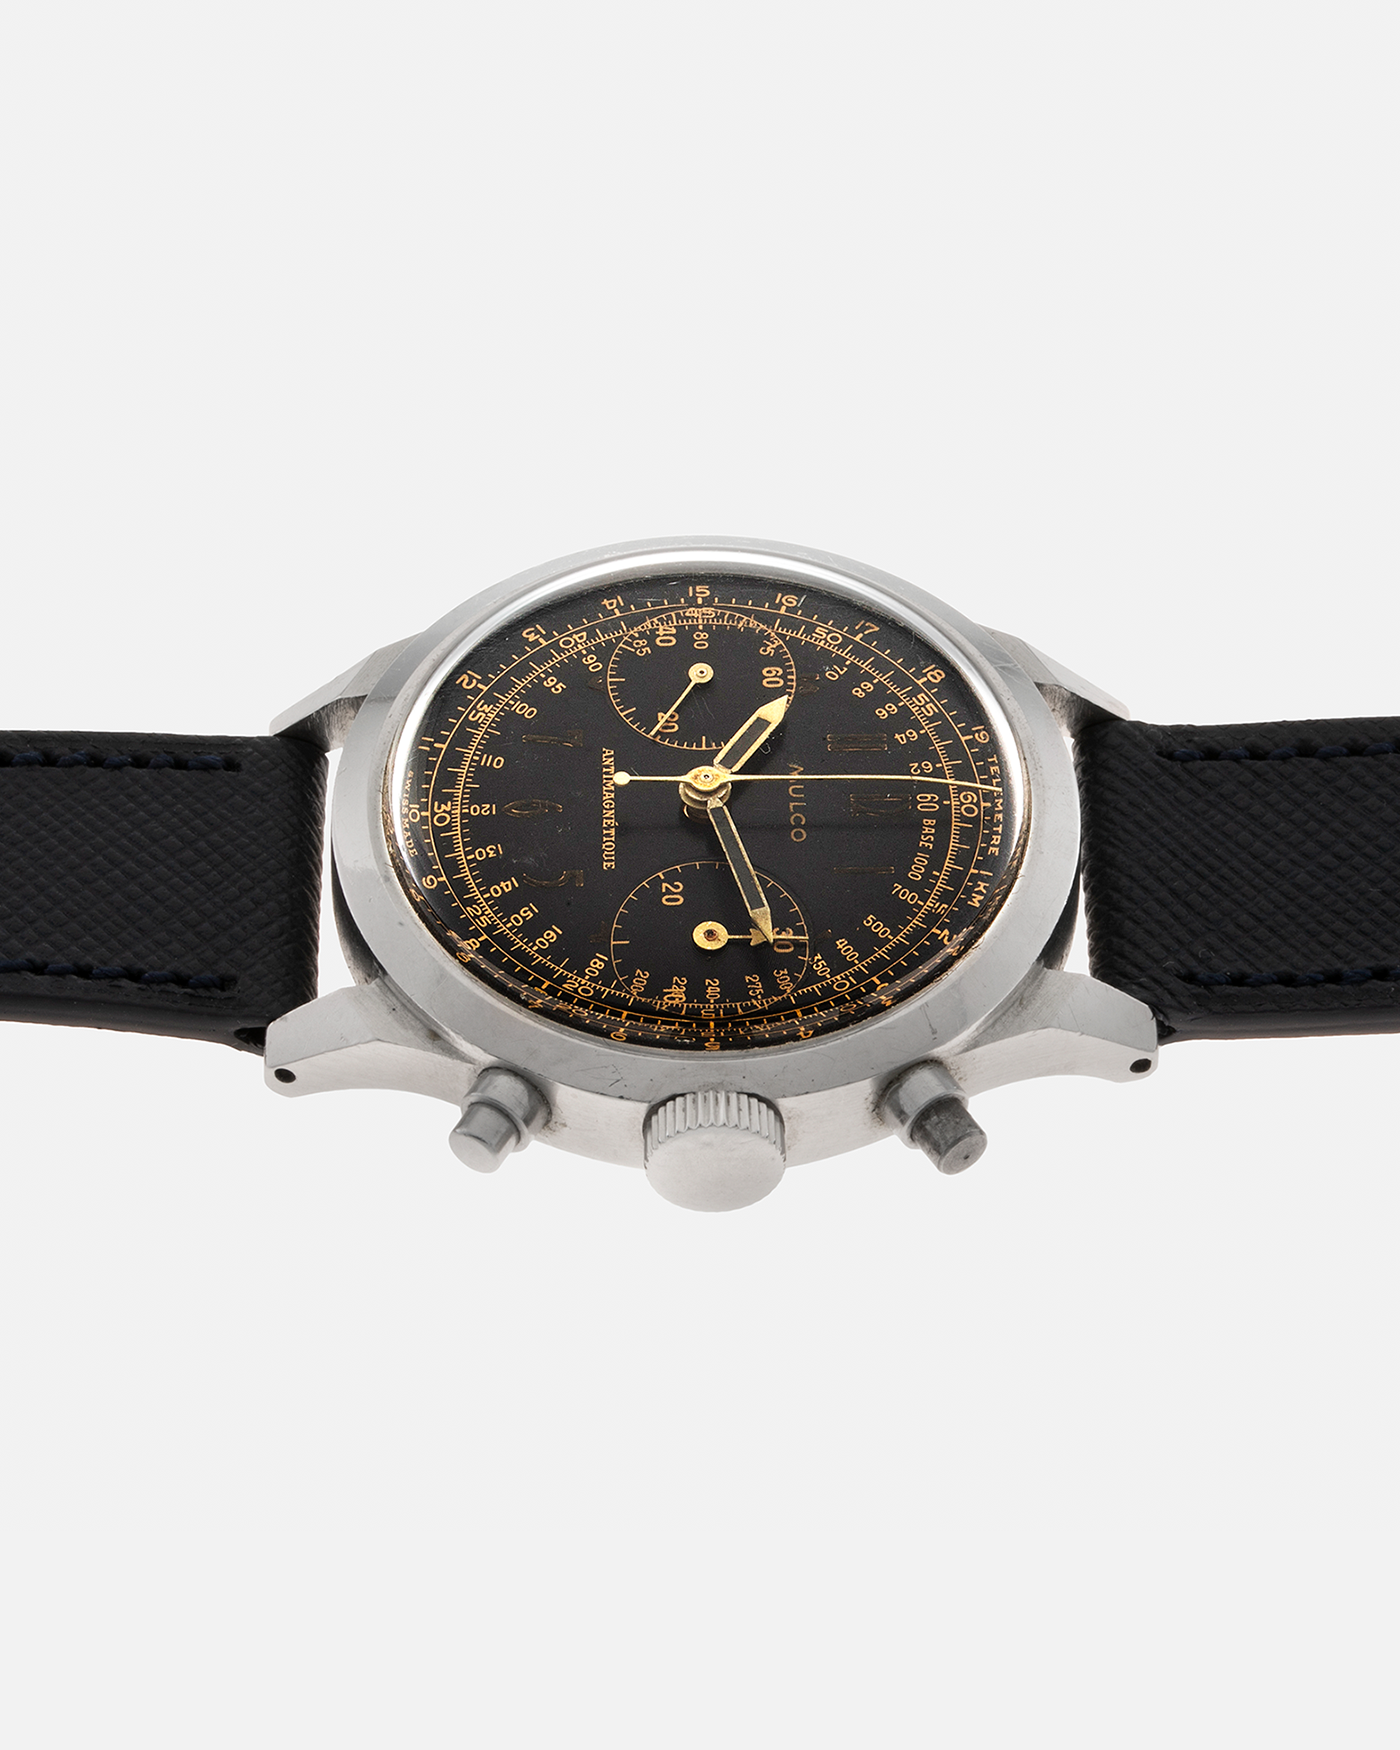 Brand: Mulco Year: 1940s Material: Stainless Steel Movement: Valjoux Cal. 22, Manual-Winding Case Diameter: 38mm (Spillman Case) Lug Width: 19mm Strap: Molequin Navy Blue Textured Calf Leather Strap